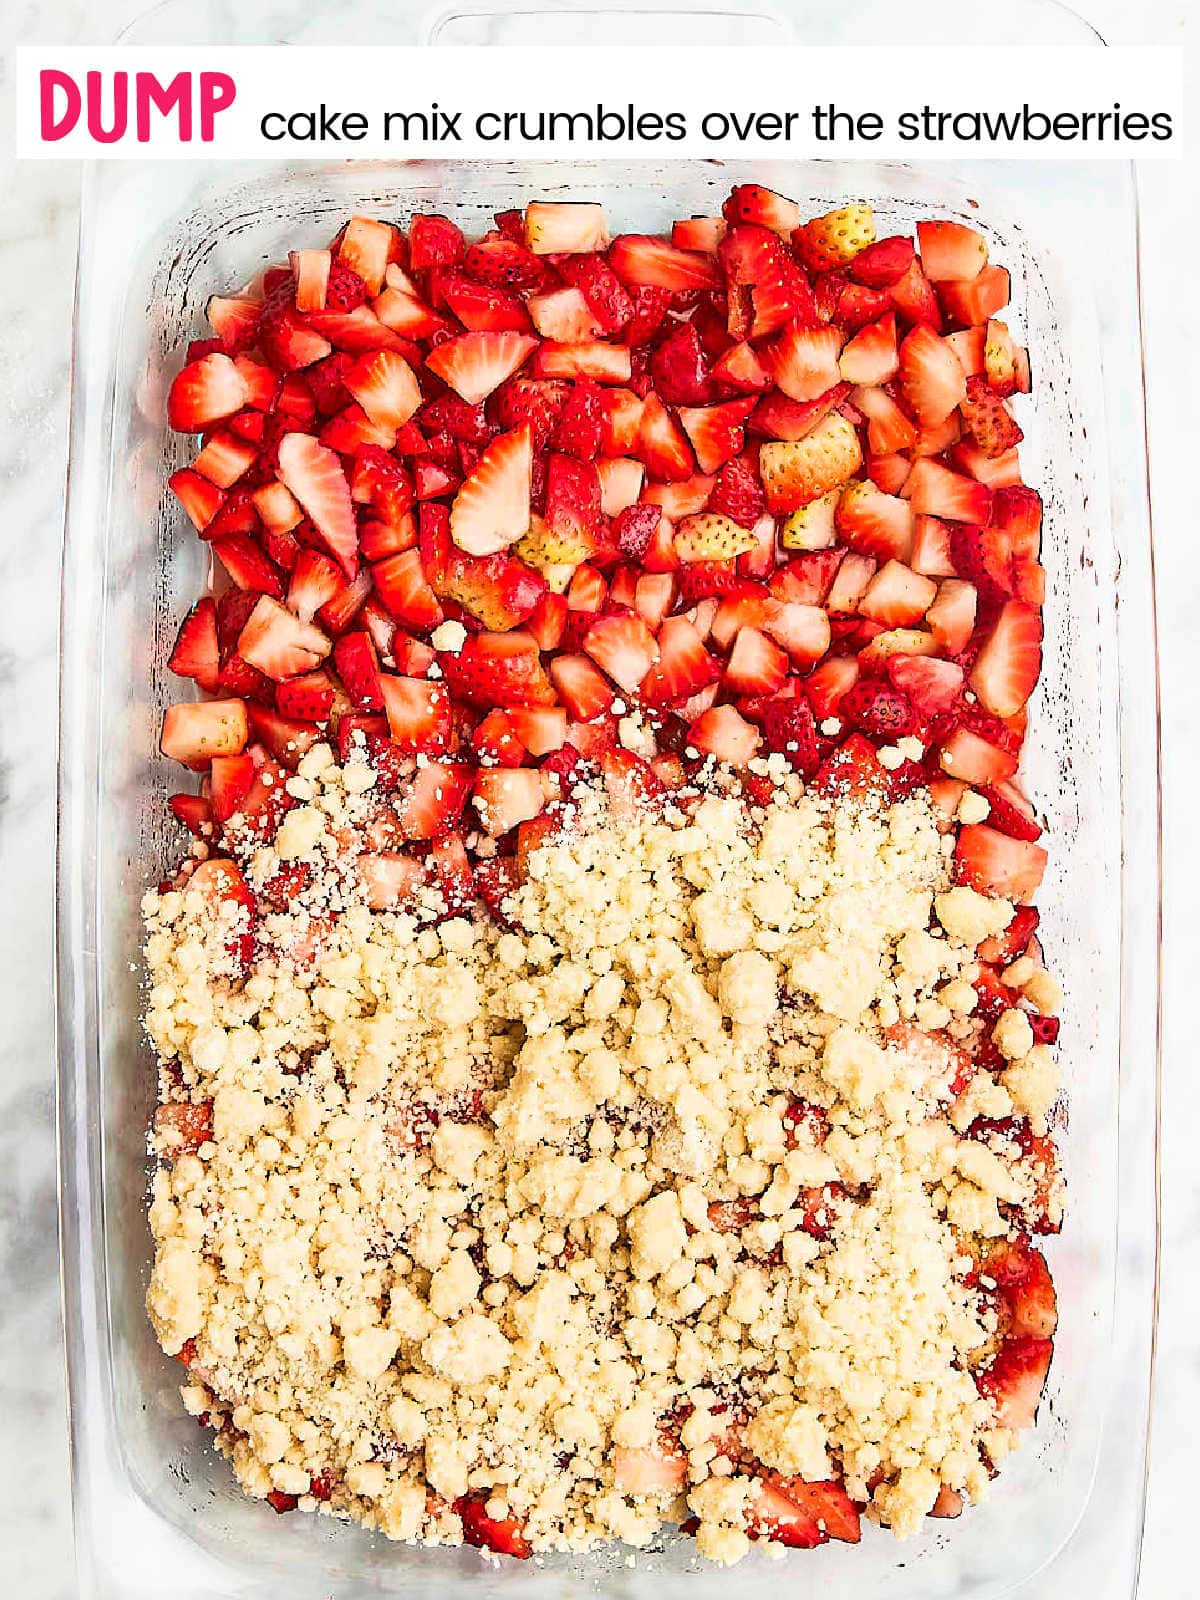 Process Step: Sprinkle cake mix crumbles over strawberries.